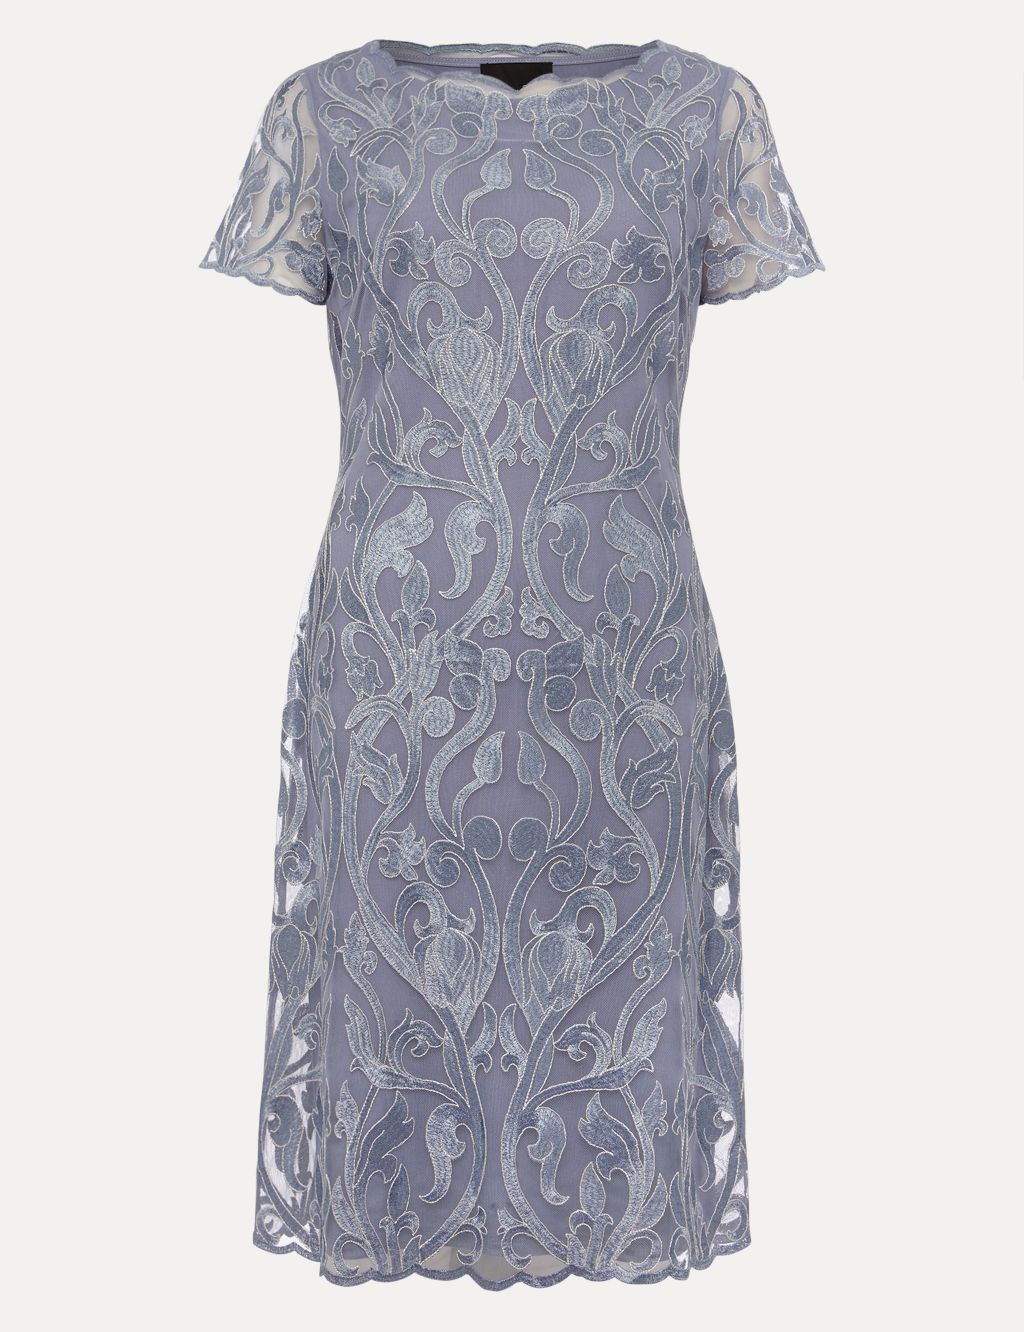 Buy Embroidered Short Sleeve Shift Dress | Phase Eight | M&S